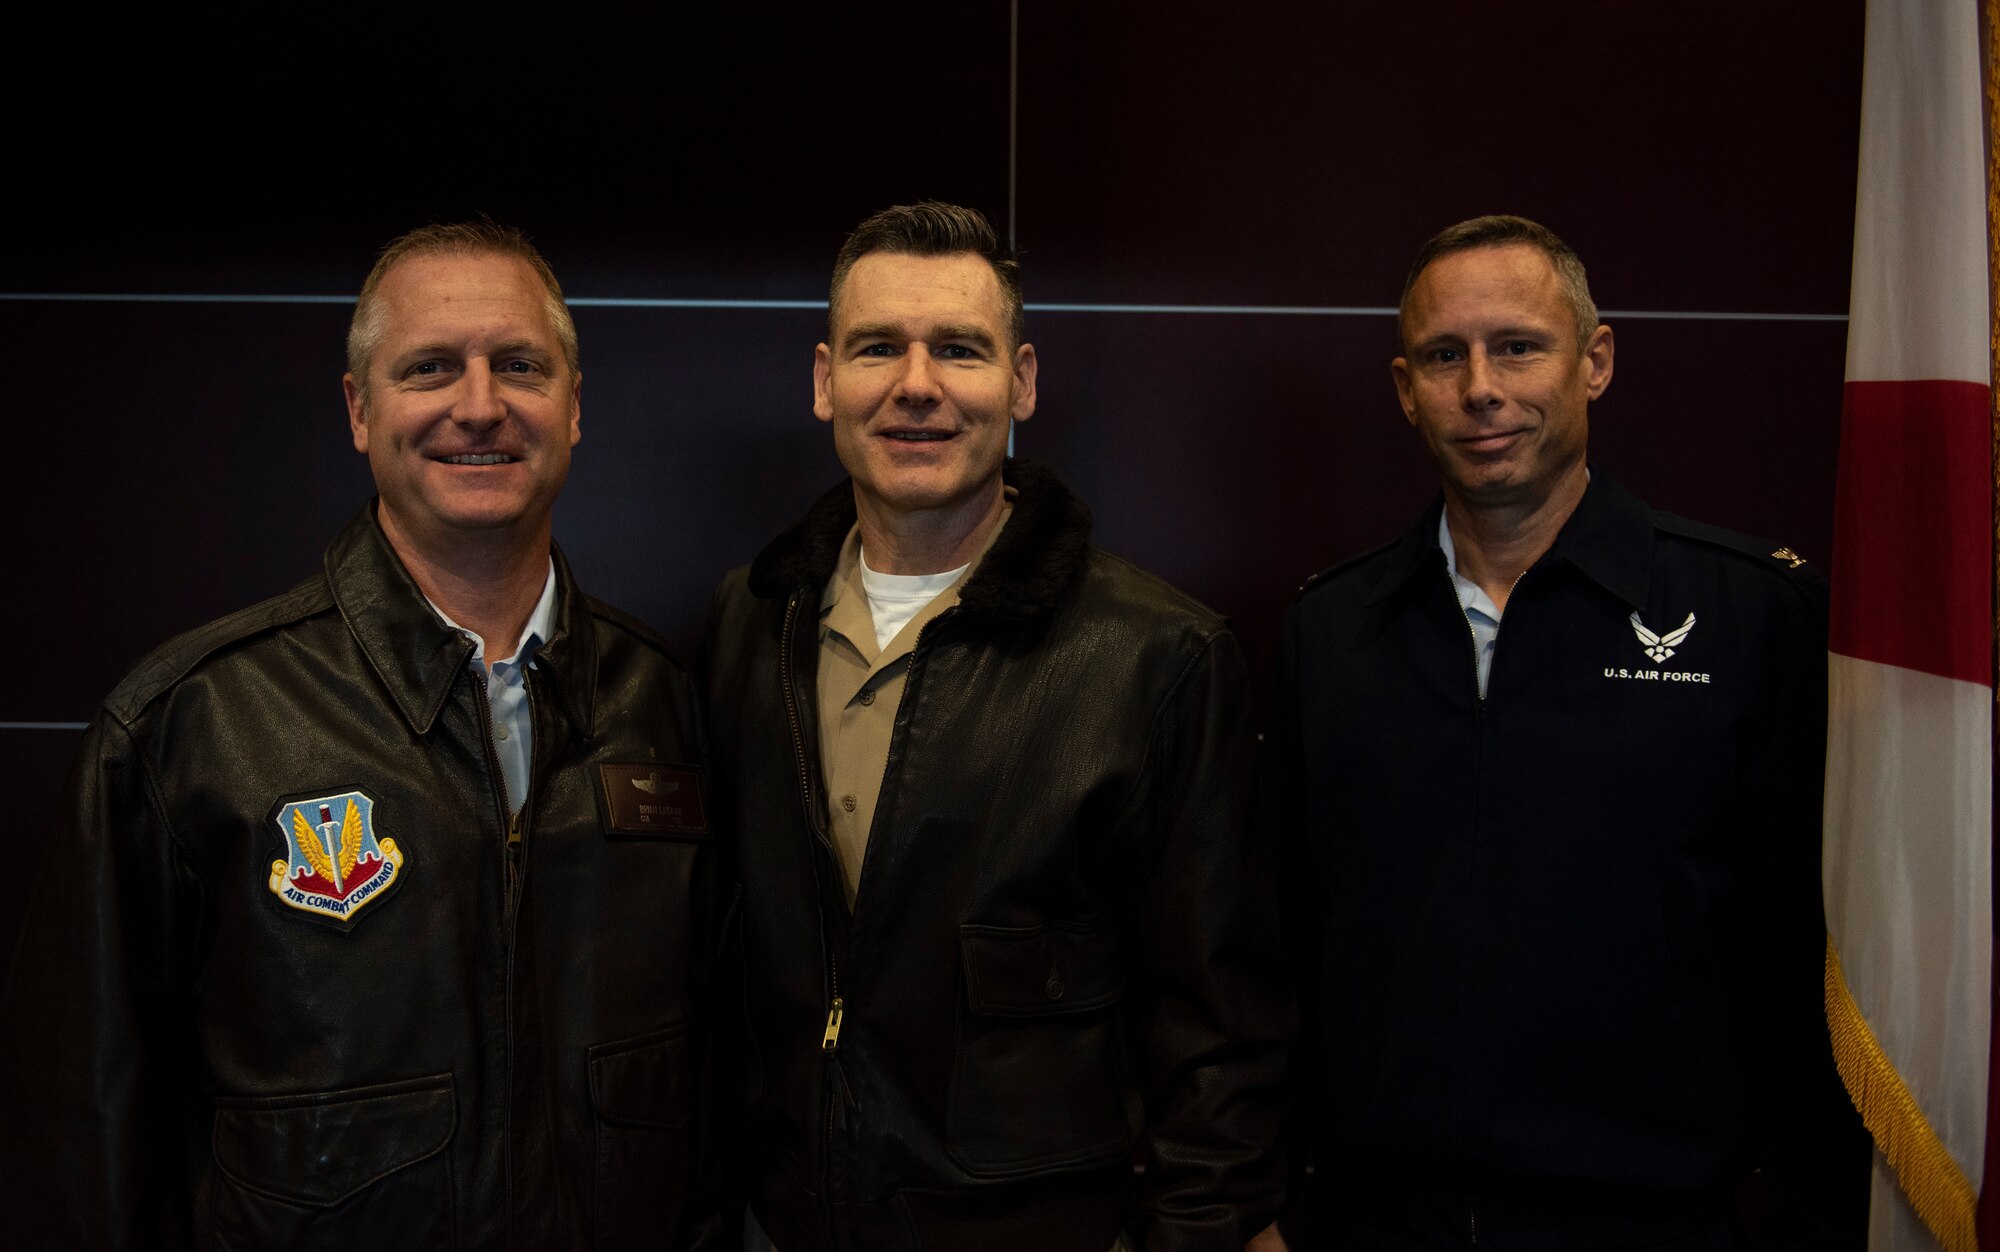 U.S. Air Force Col. Brian Laidlaw, 325th Fighter Wing commander, left, U.S. Navy Cmdr. Kevin Christenson, Naval Support Activity Panama City commanding officer, center, and U.S. Air Force Col. Travis Leighton, Tyndall Program Management Office director, pose for a photo at the Bay County Chamber of Commerce First Friday meeting at Panama City, Florida, Jan. 10, 2020. They attended the event as representatives of military communities in the local area. (U.S. Air Force photo by Staff Sgt. Magen M. Reeves)